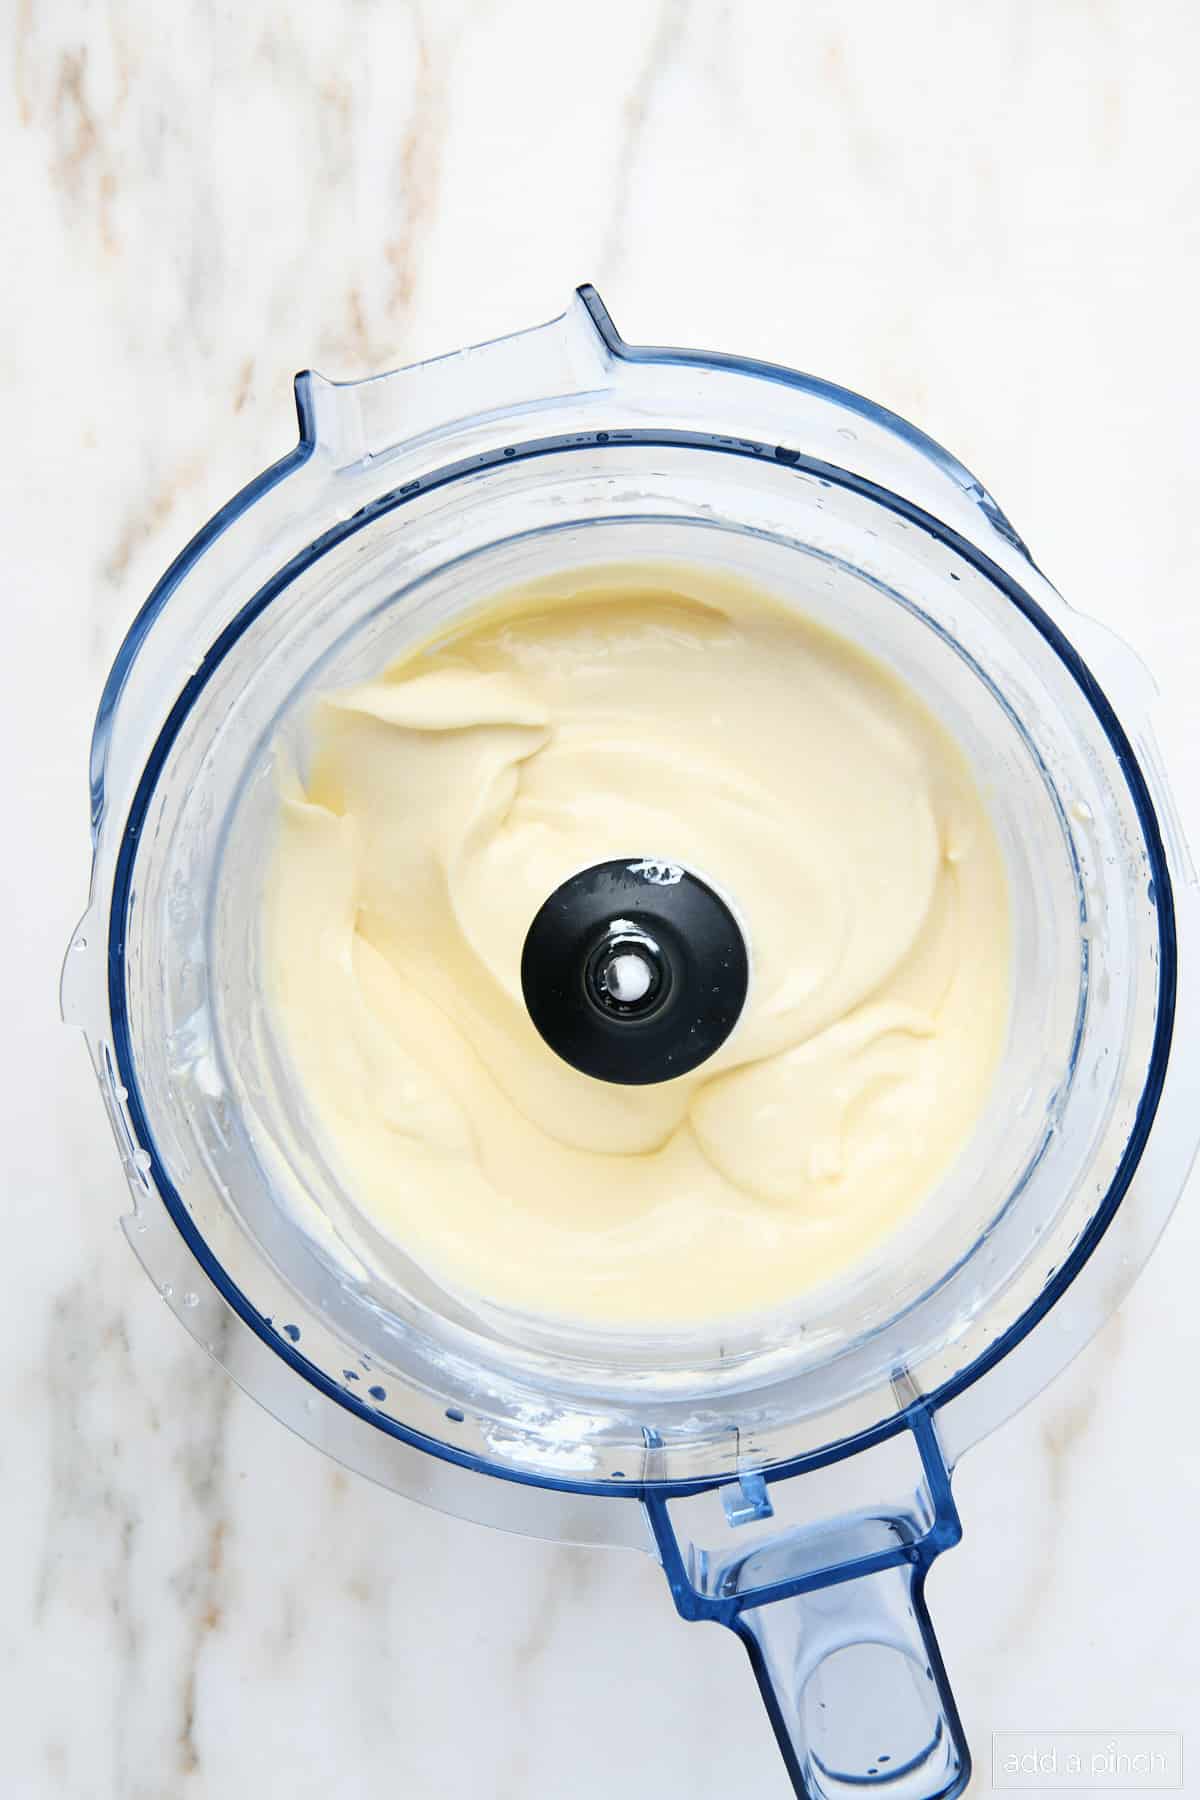 Cheesecake pie mixture in a food processor bowl.